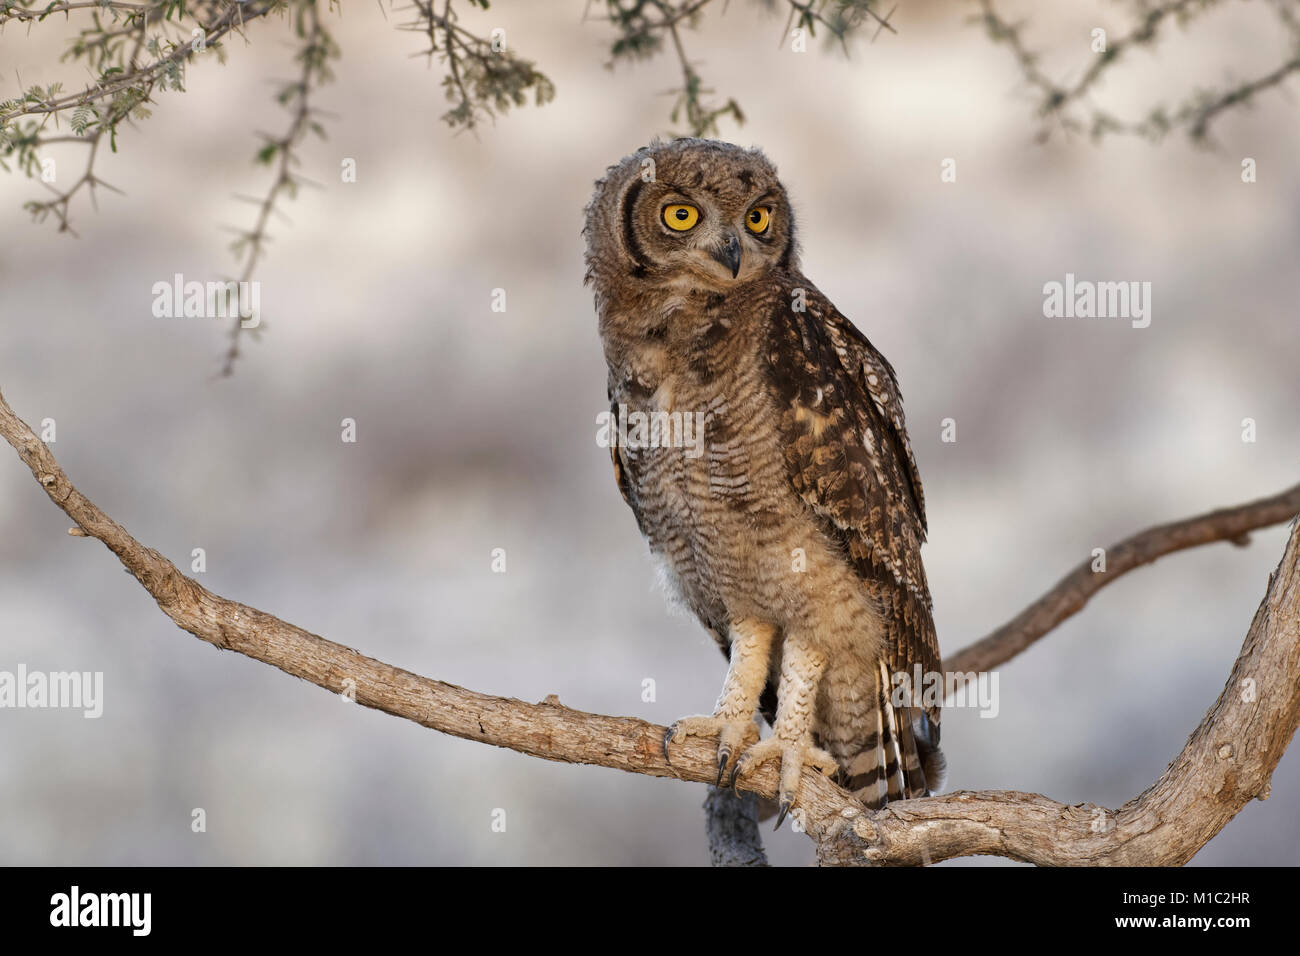 Spotted eagle-owl (Bubo africanus), young bird perched on a tree branch at dusk, Kgalagadi Transfrontier Park, Northern Cape, South Africa, Africa Stock Photo